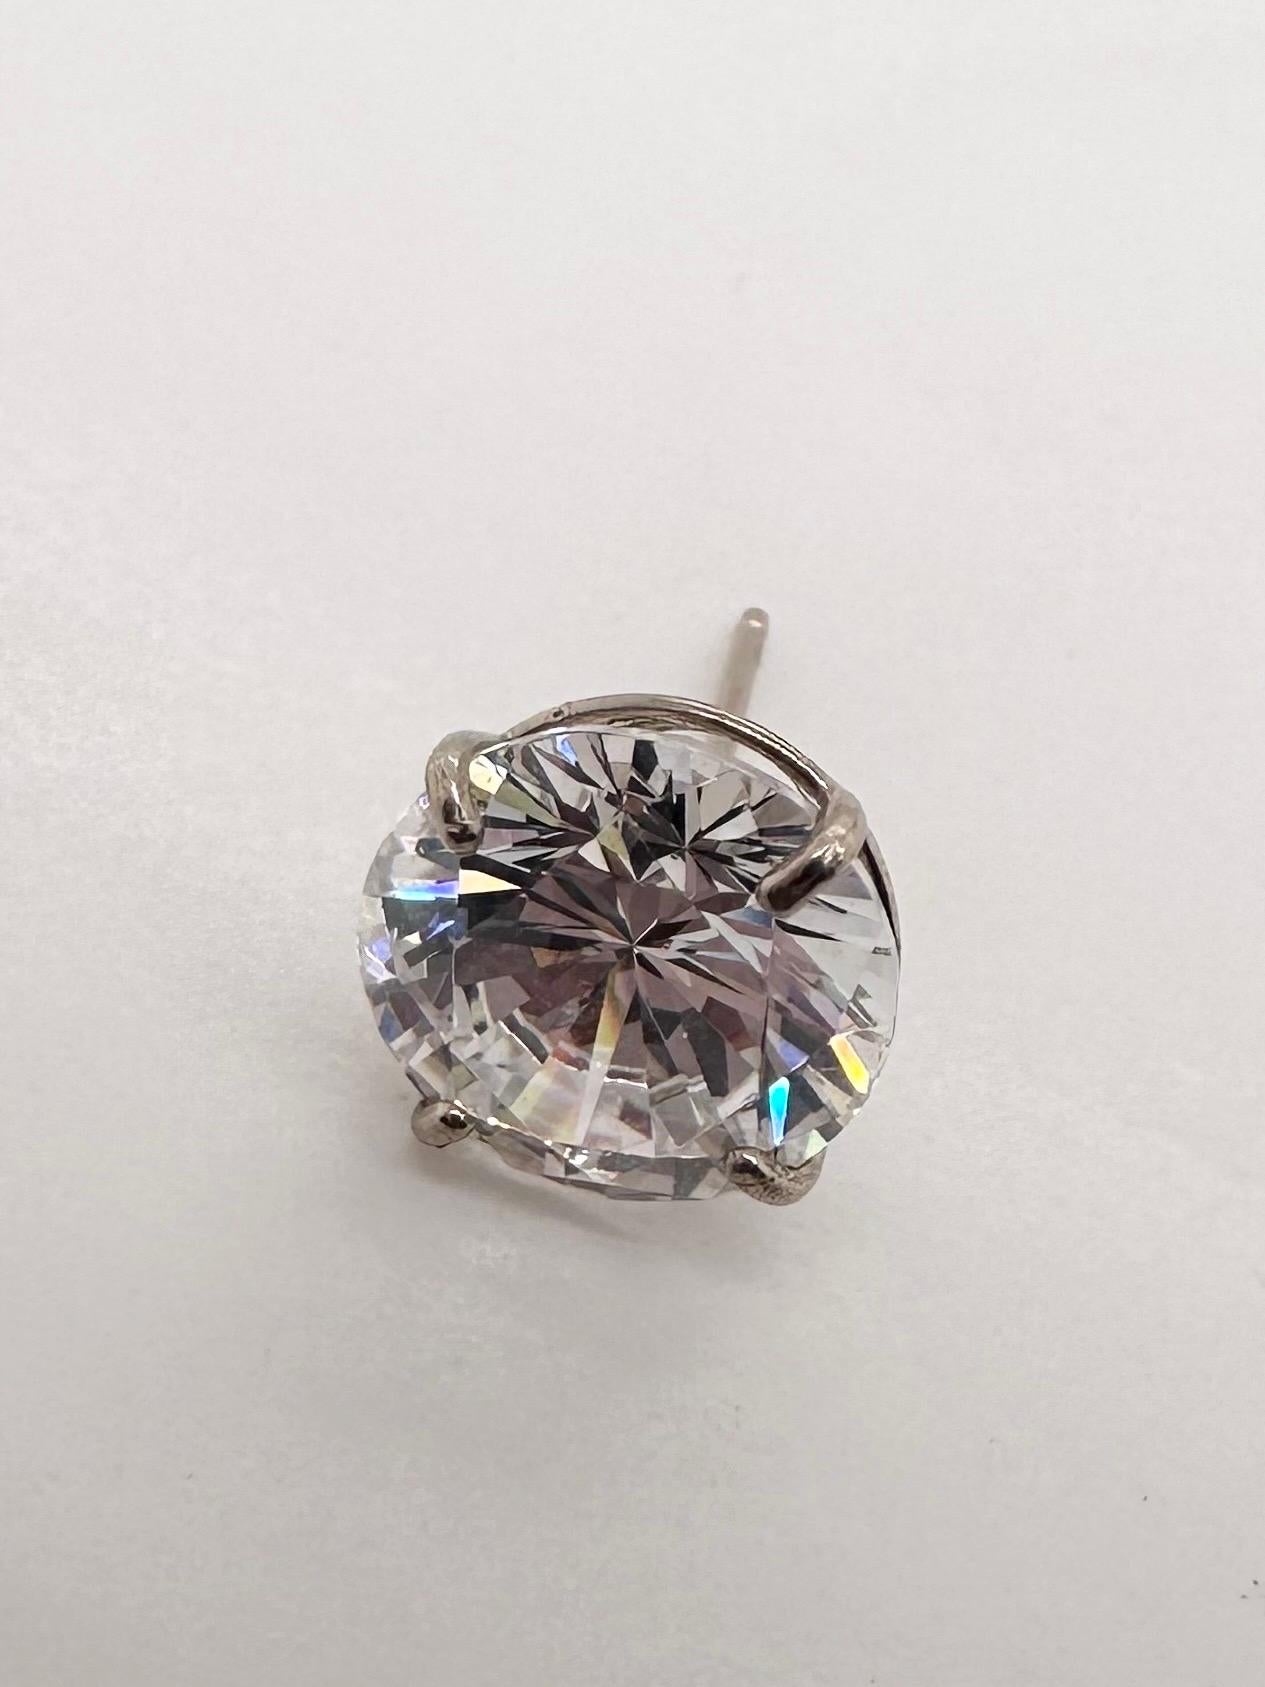 Single earring in 14KT white gold with a cubic, great for those that have one hole or for the second hole! 

Certificate of authenticity comes with purchase

ABOUT US
We are a family-owned business. Our studio in located in the heart of Boca Raton